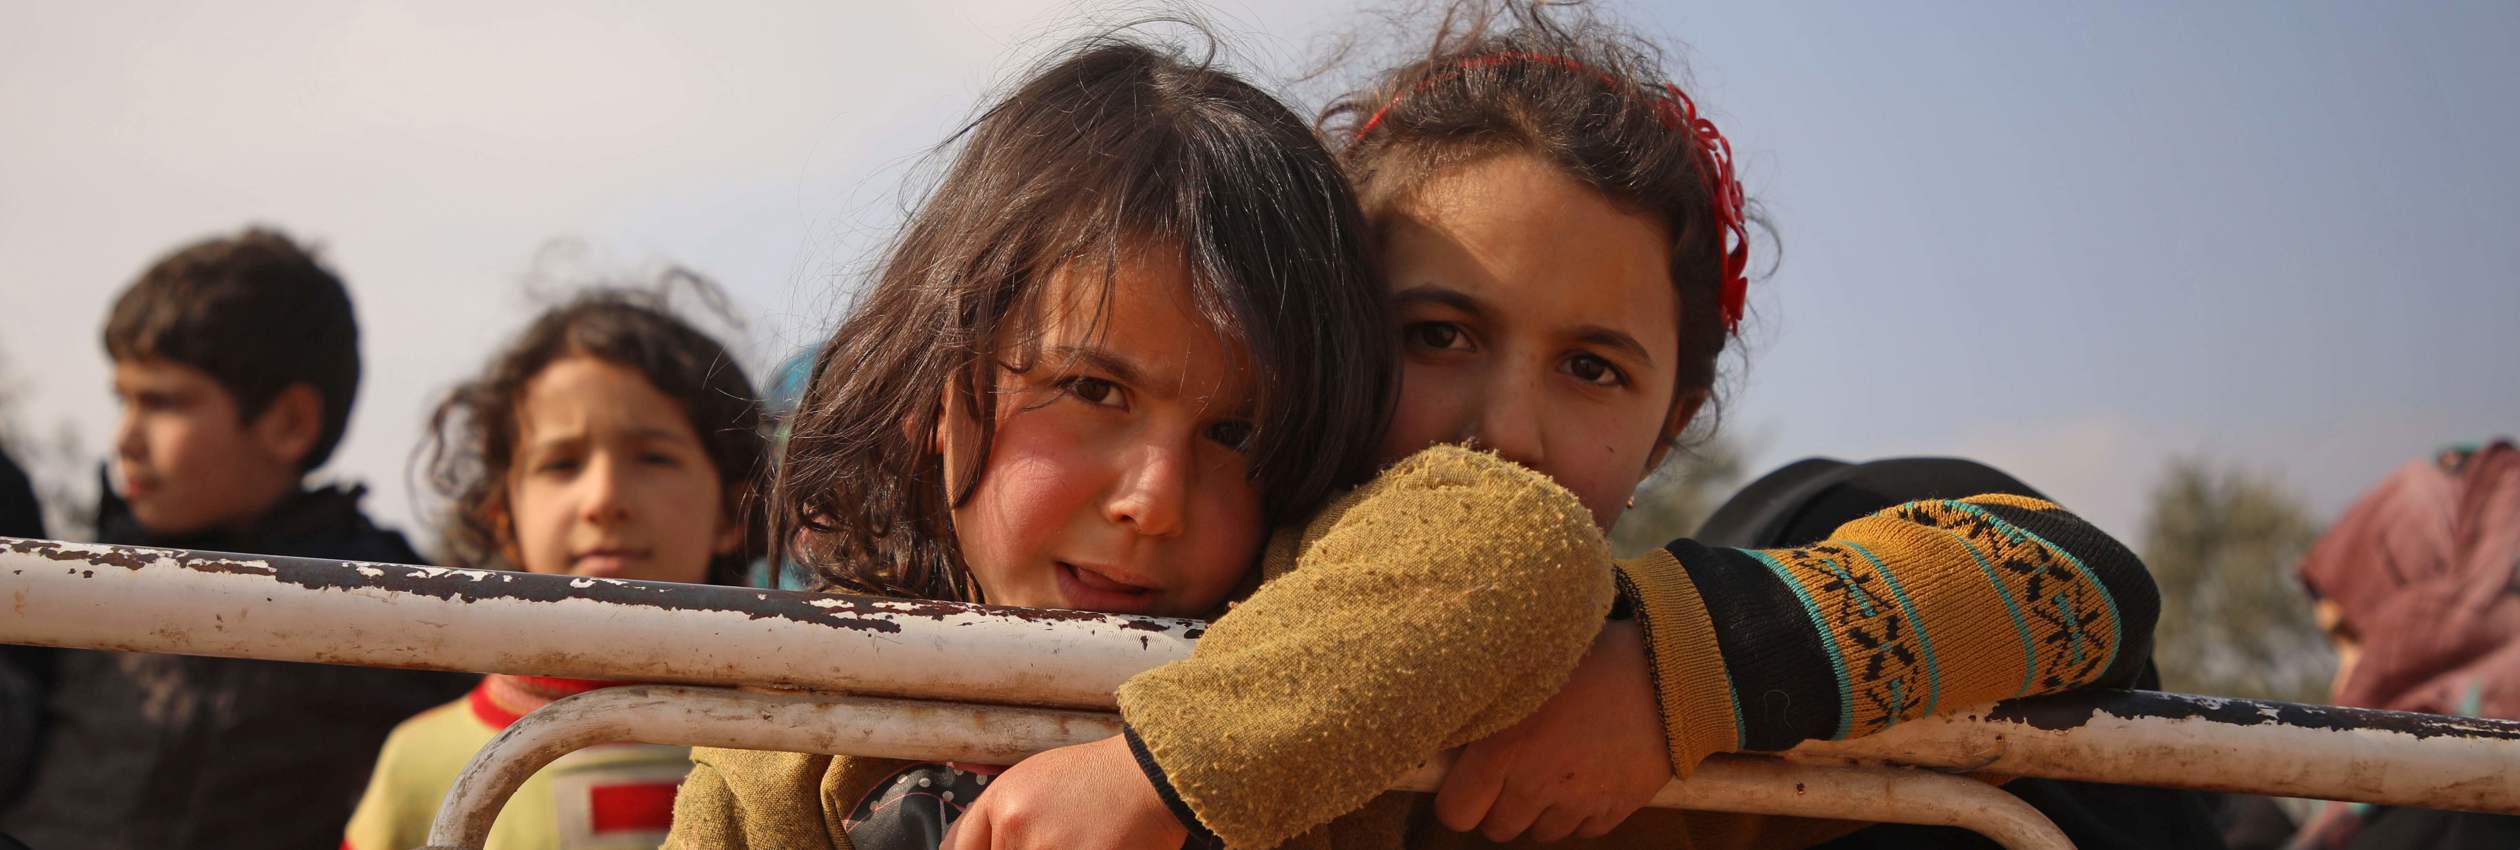 Displaced Syrian girls stand in the back of a truck parked at a newly-established camp on the edges of Maaret Misrin town in Syria's Idlib province